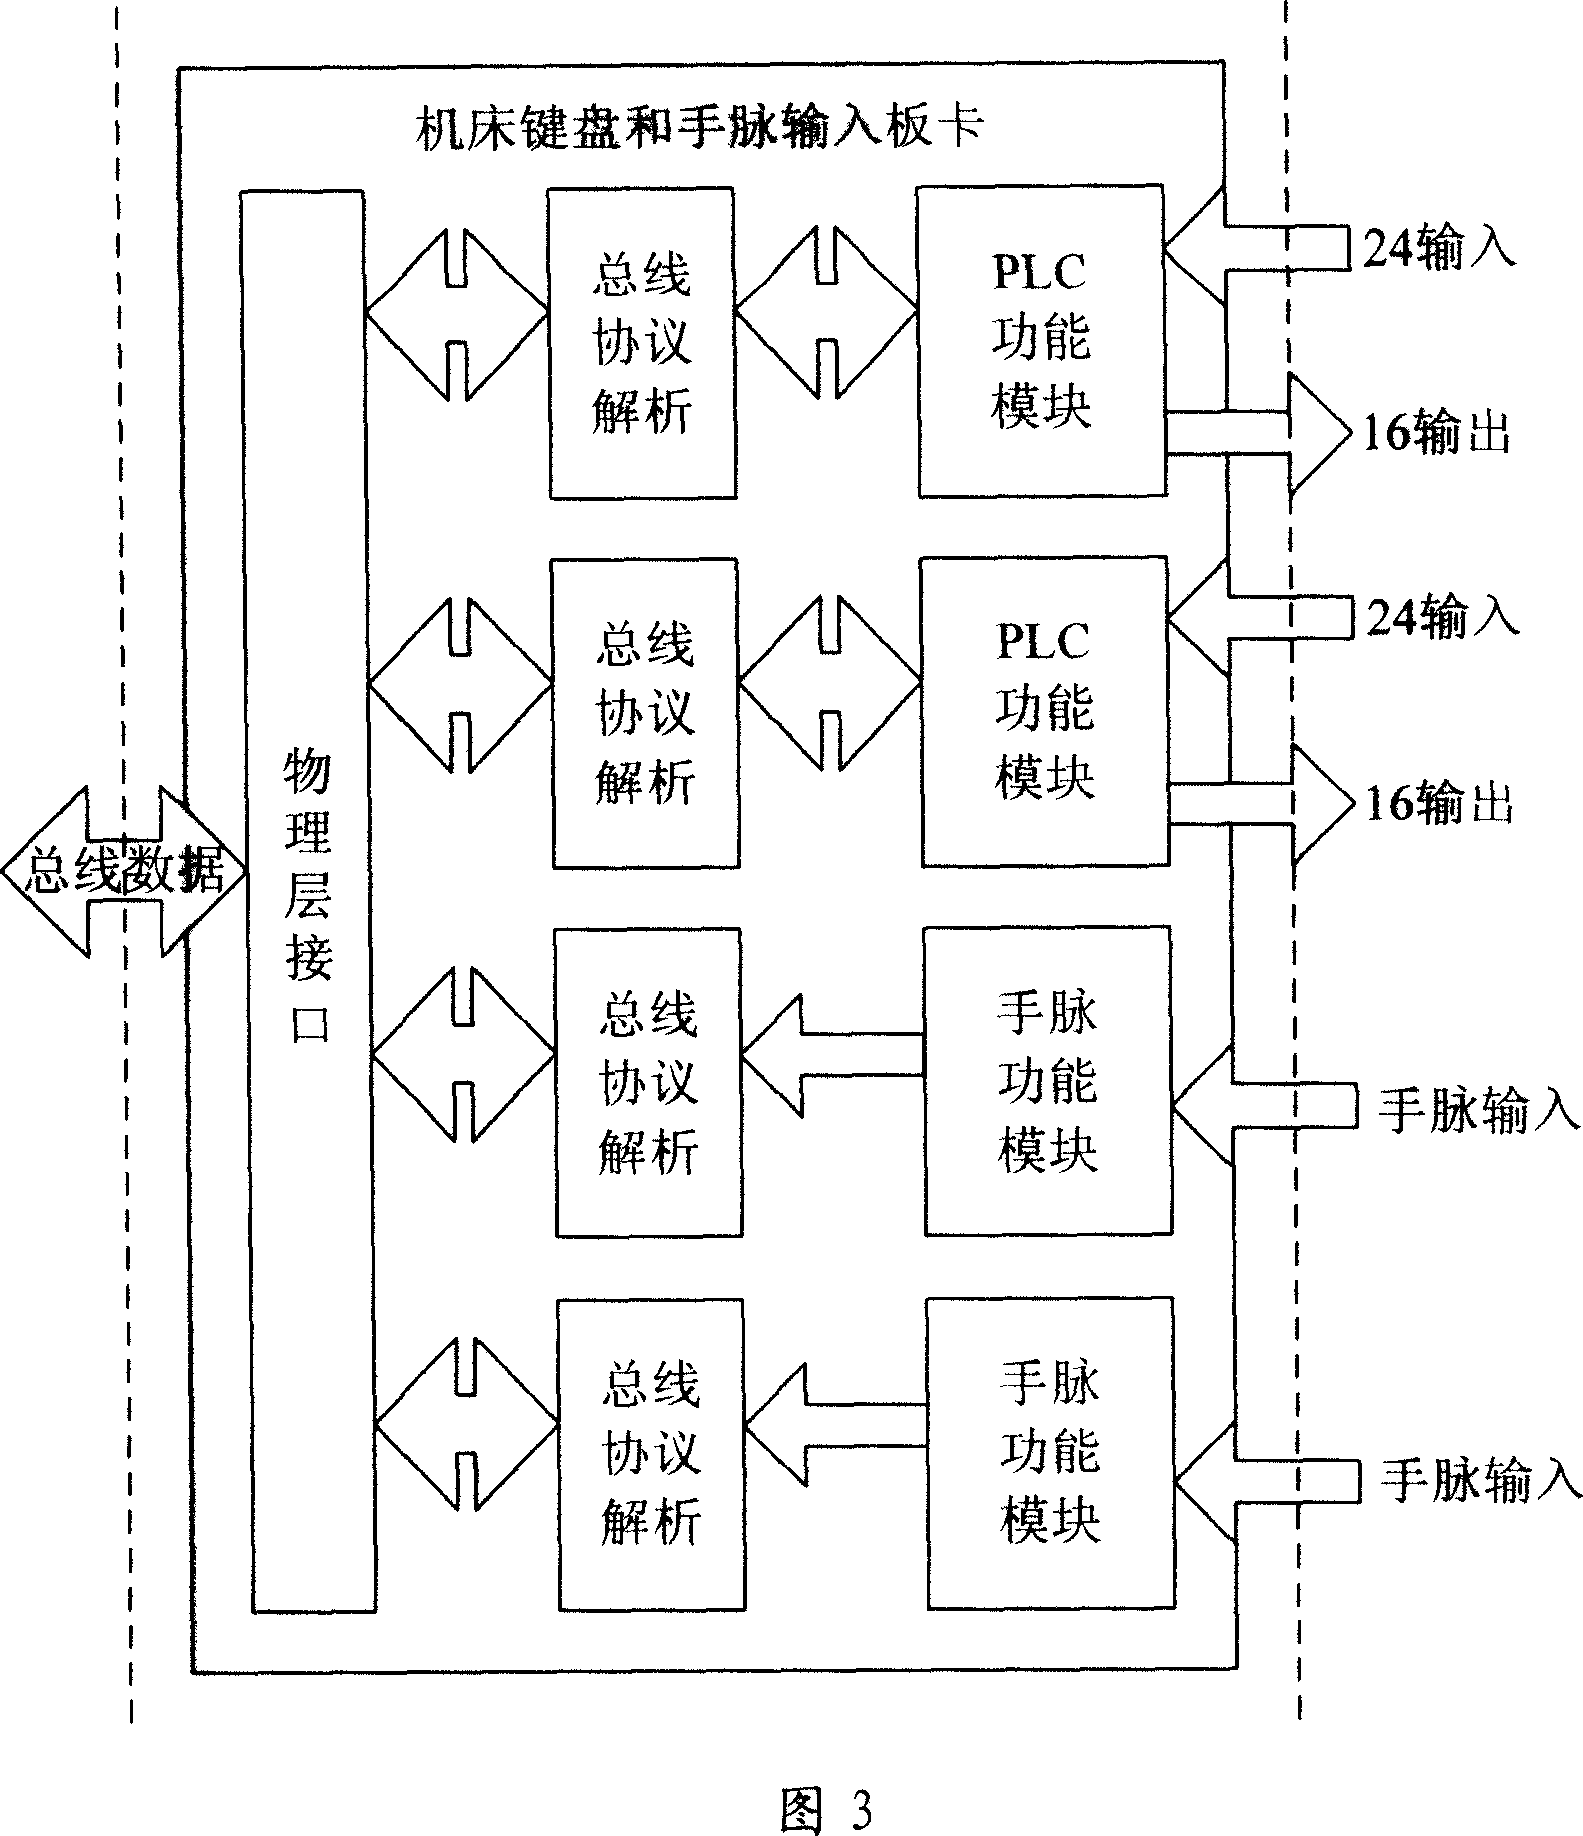 Device for integrating manual pulse generator with bus type machine tools control panel